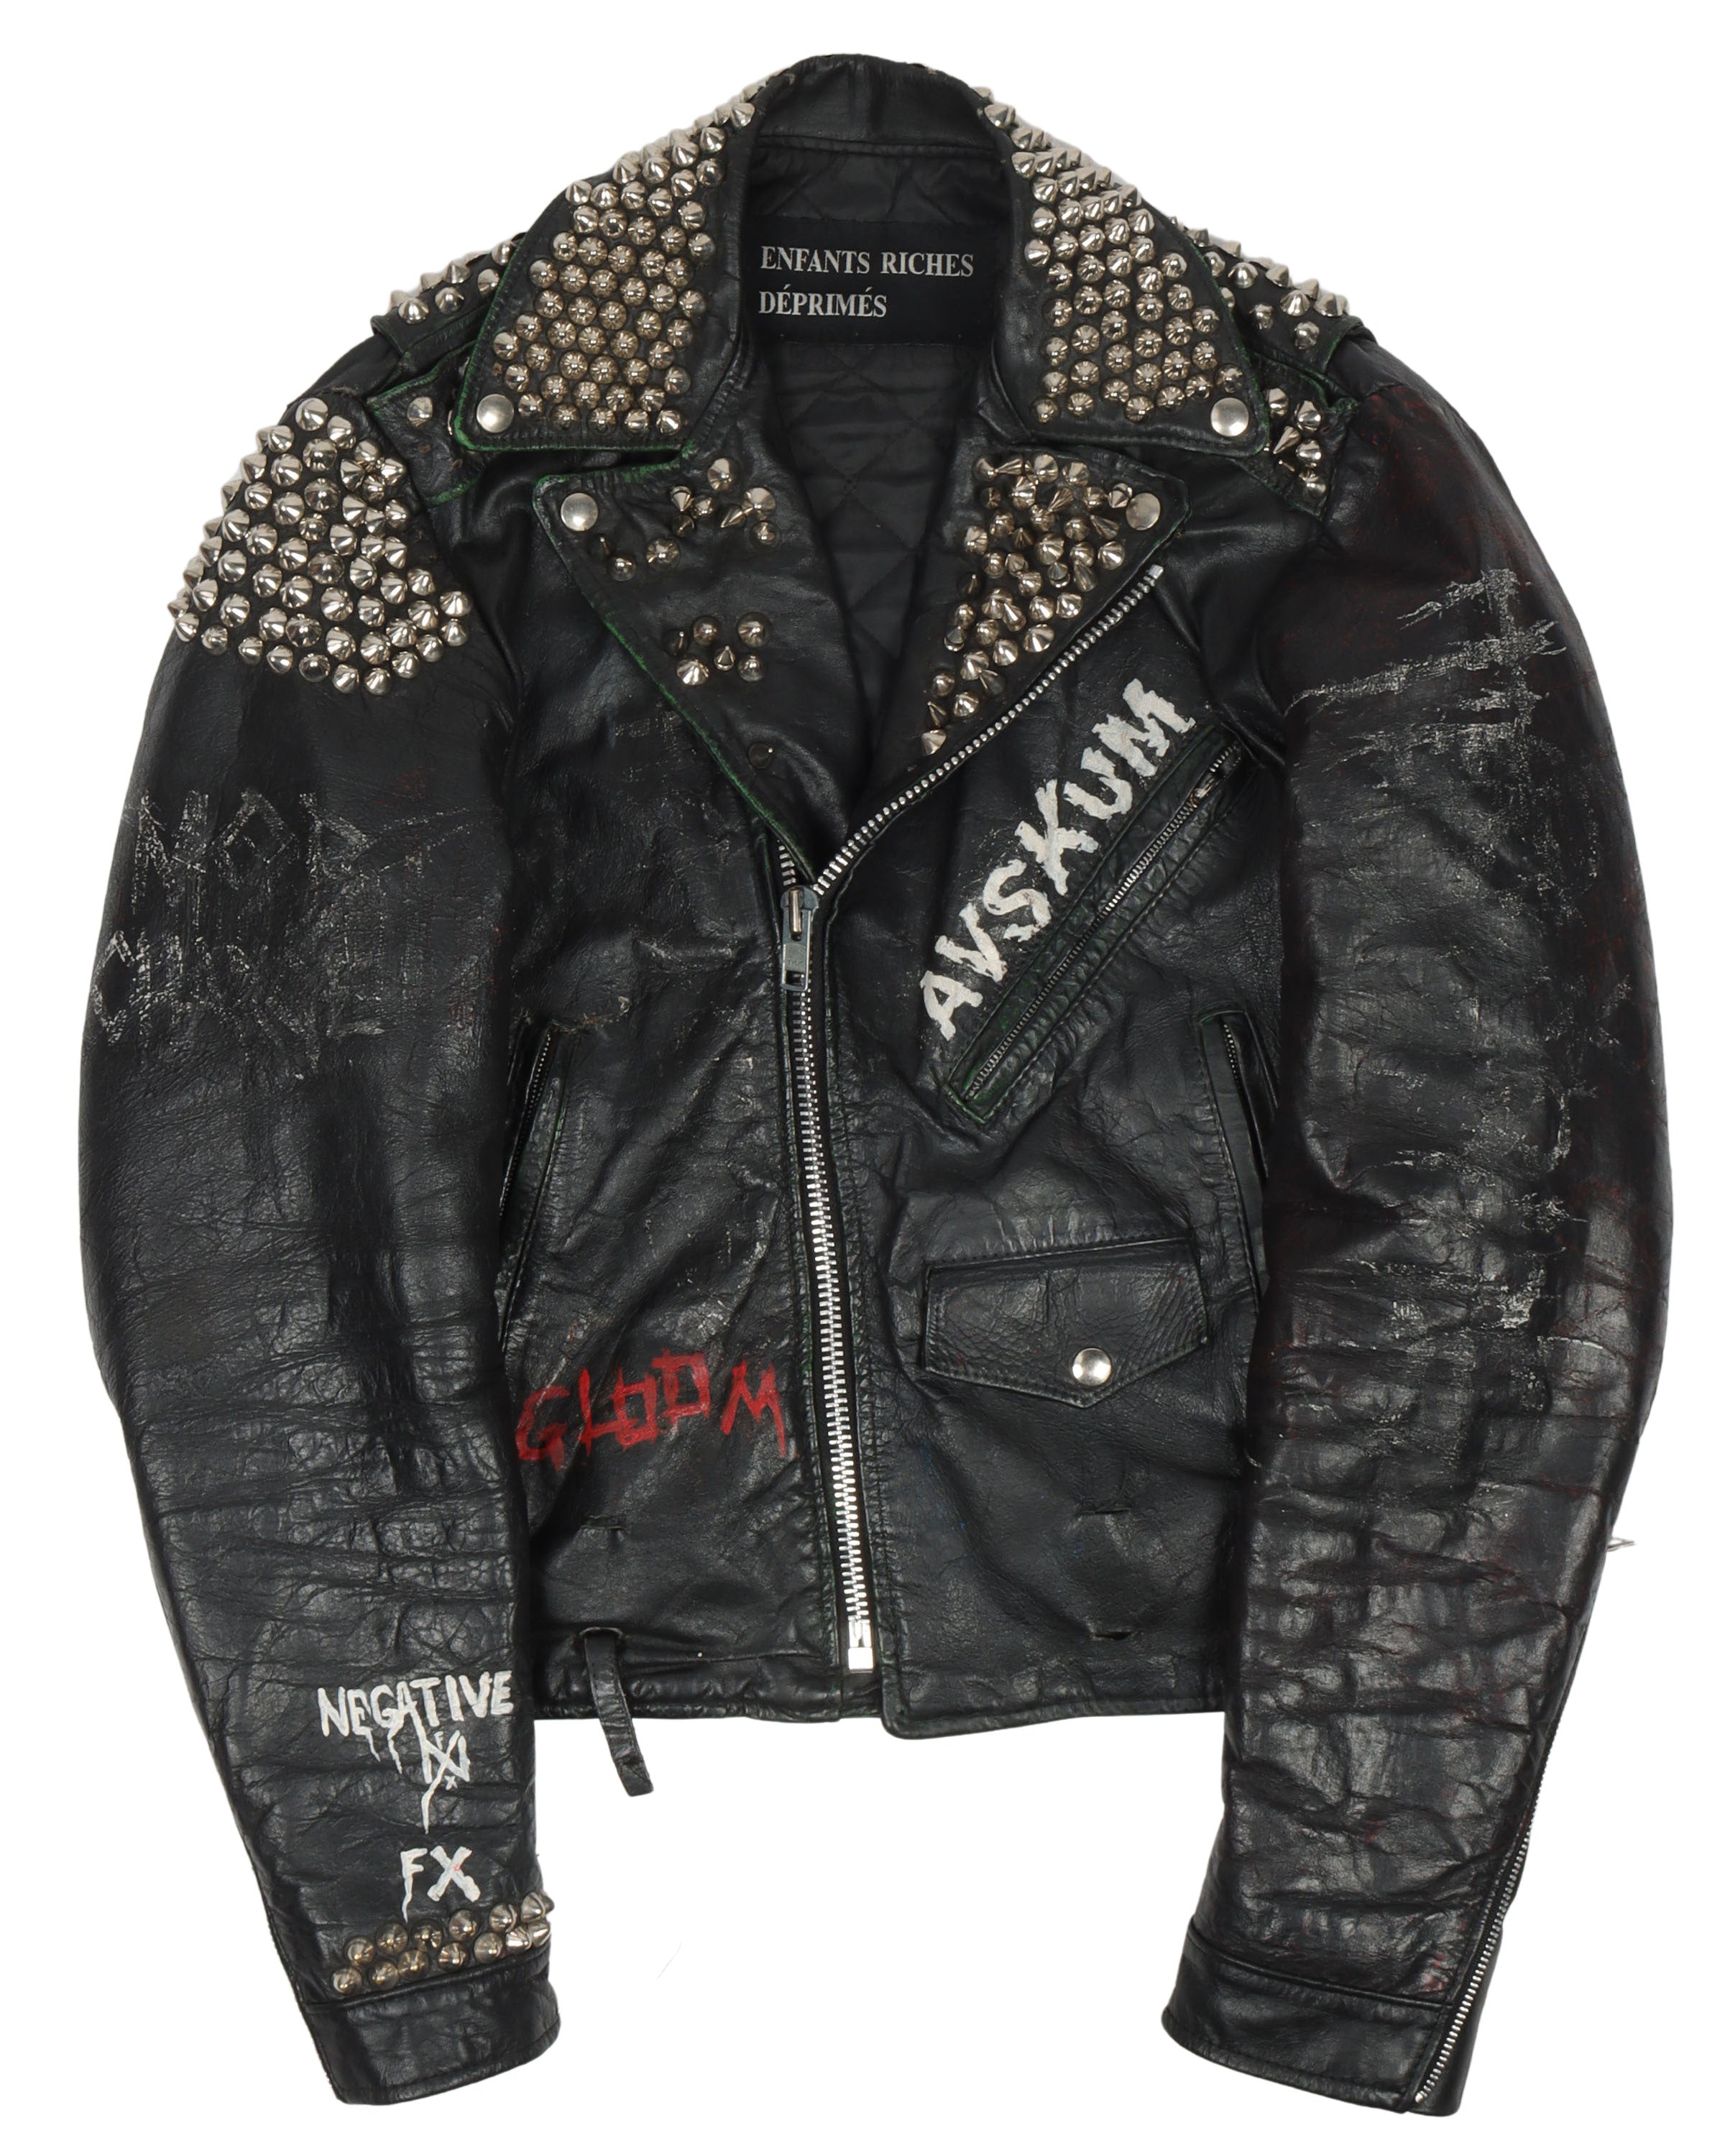 Enfants Riches Deprimes Spiked & Painted Leather Jacket